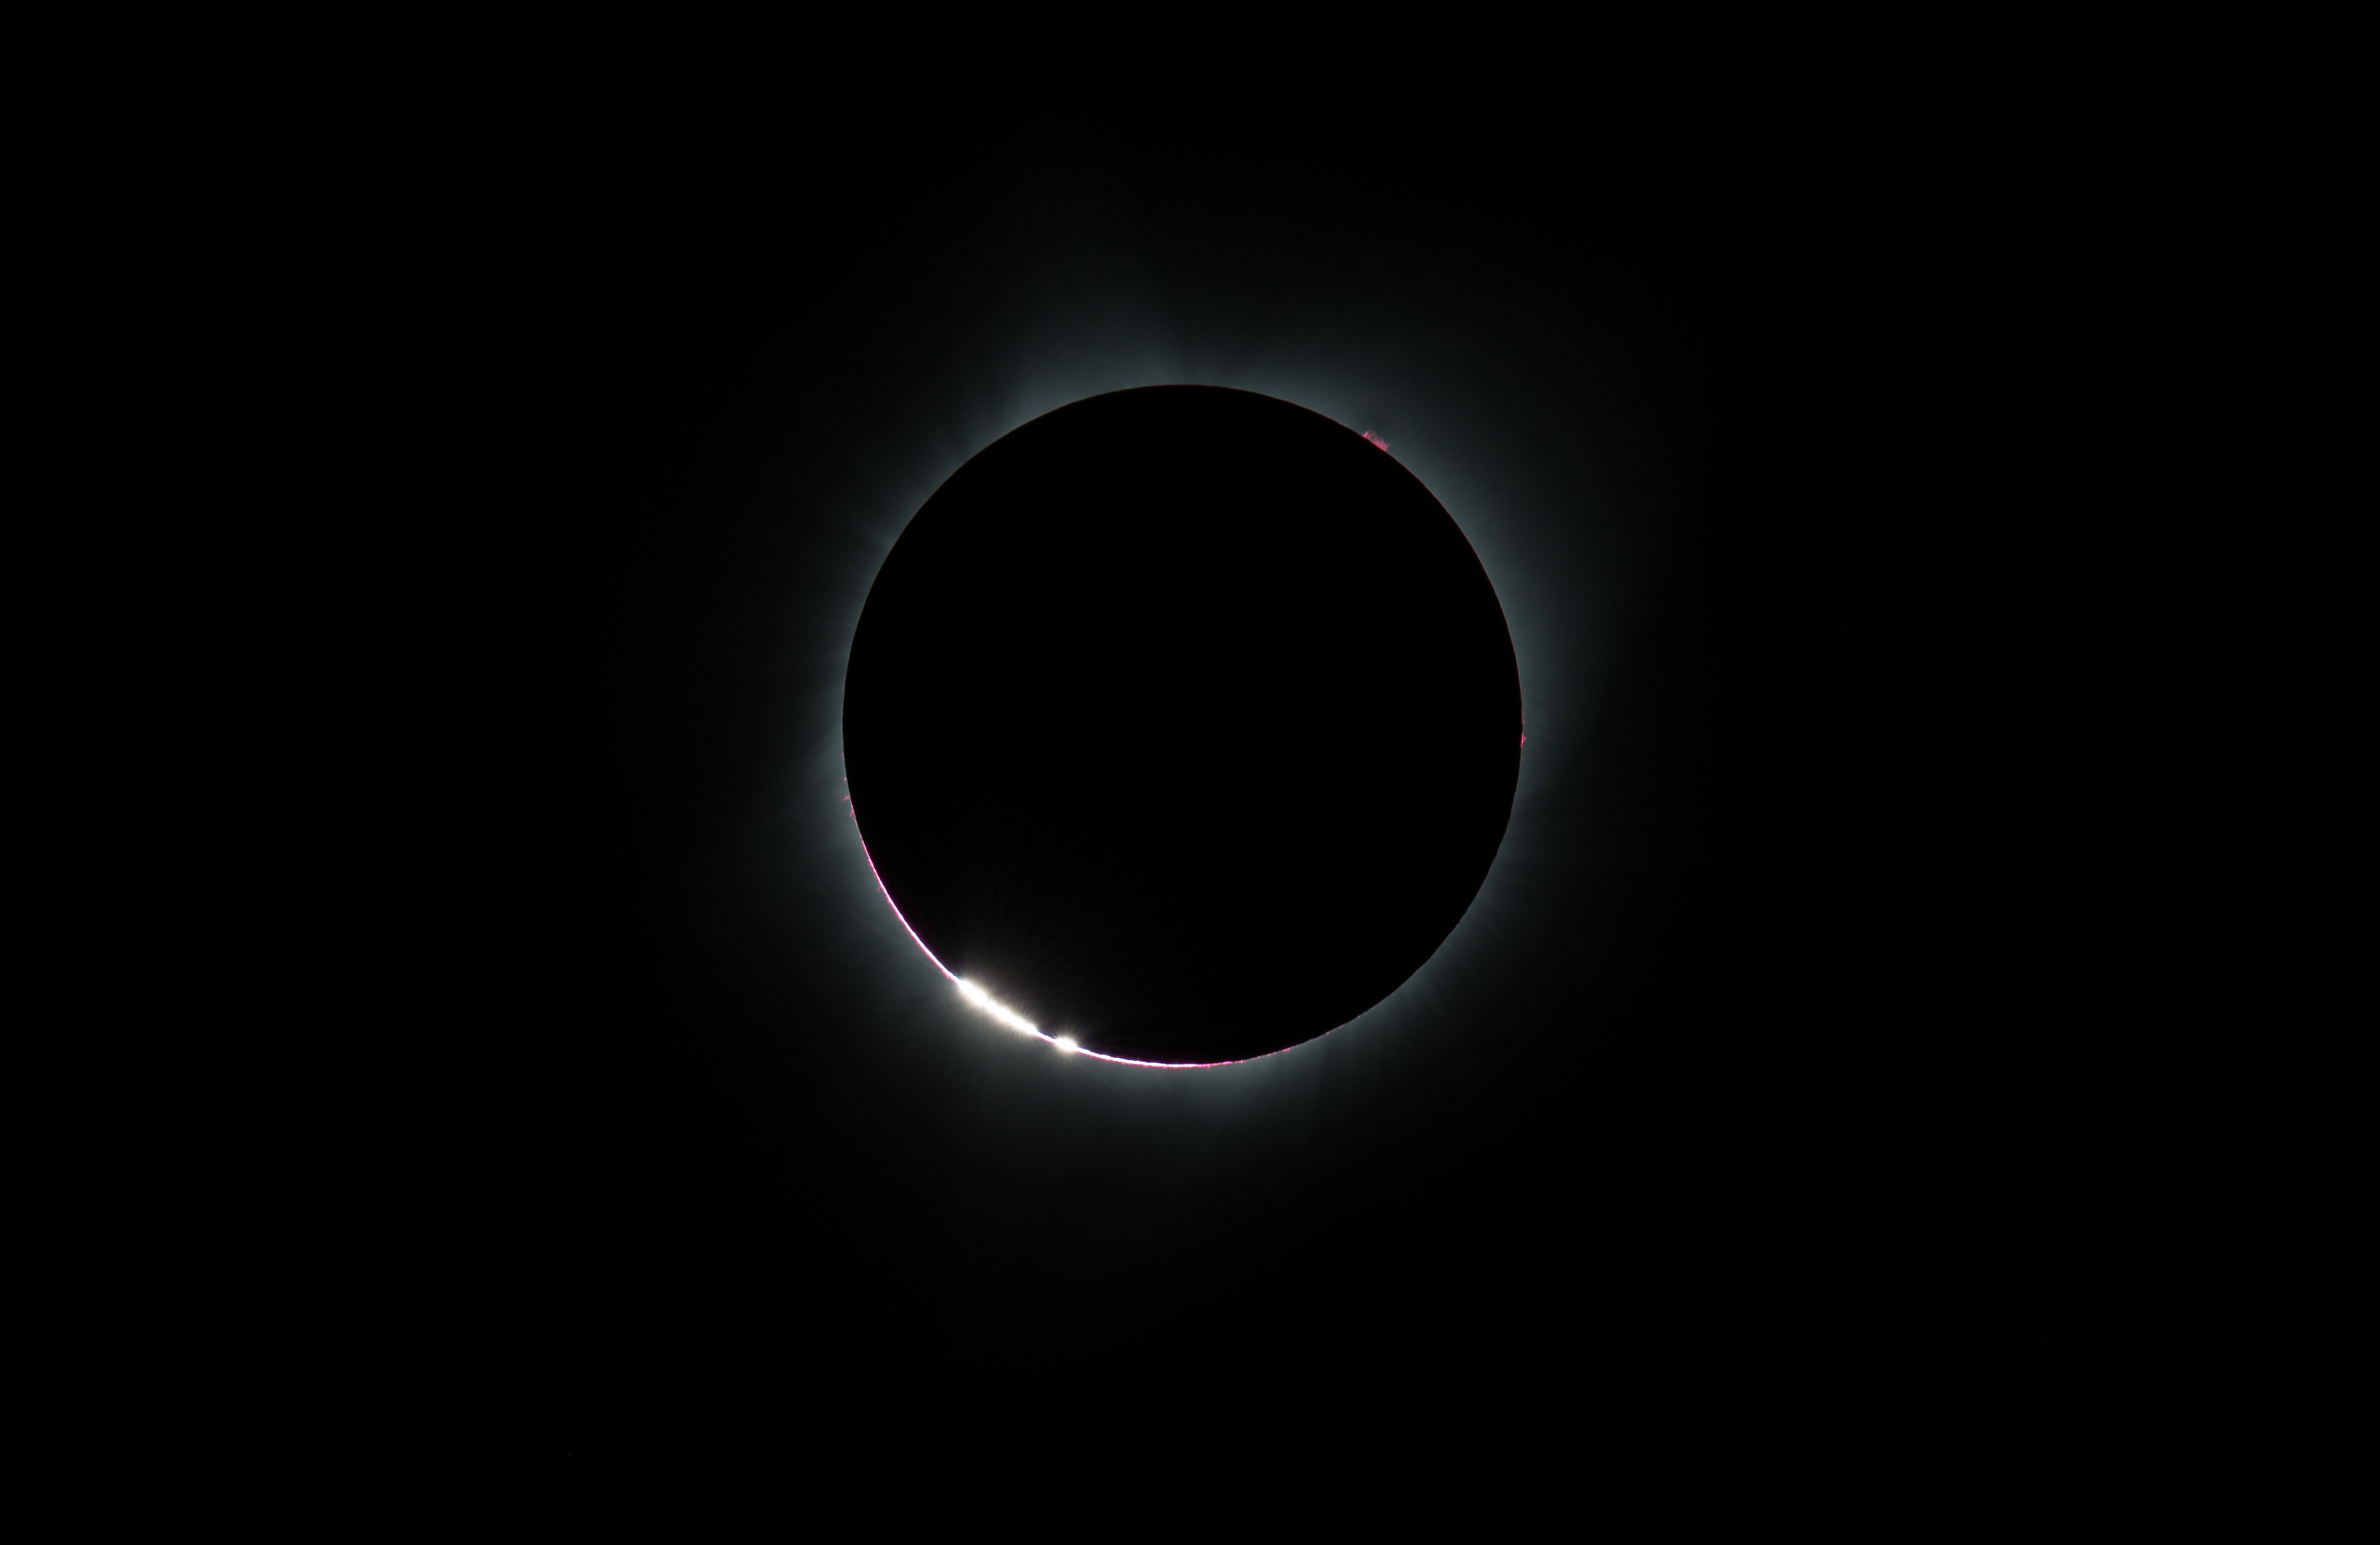 Photograph of eclipse.